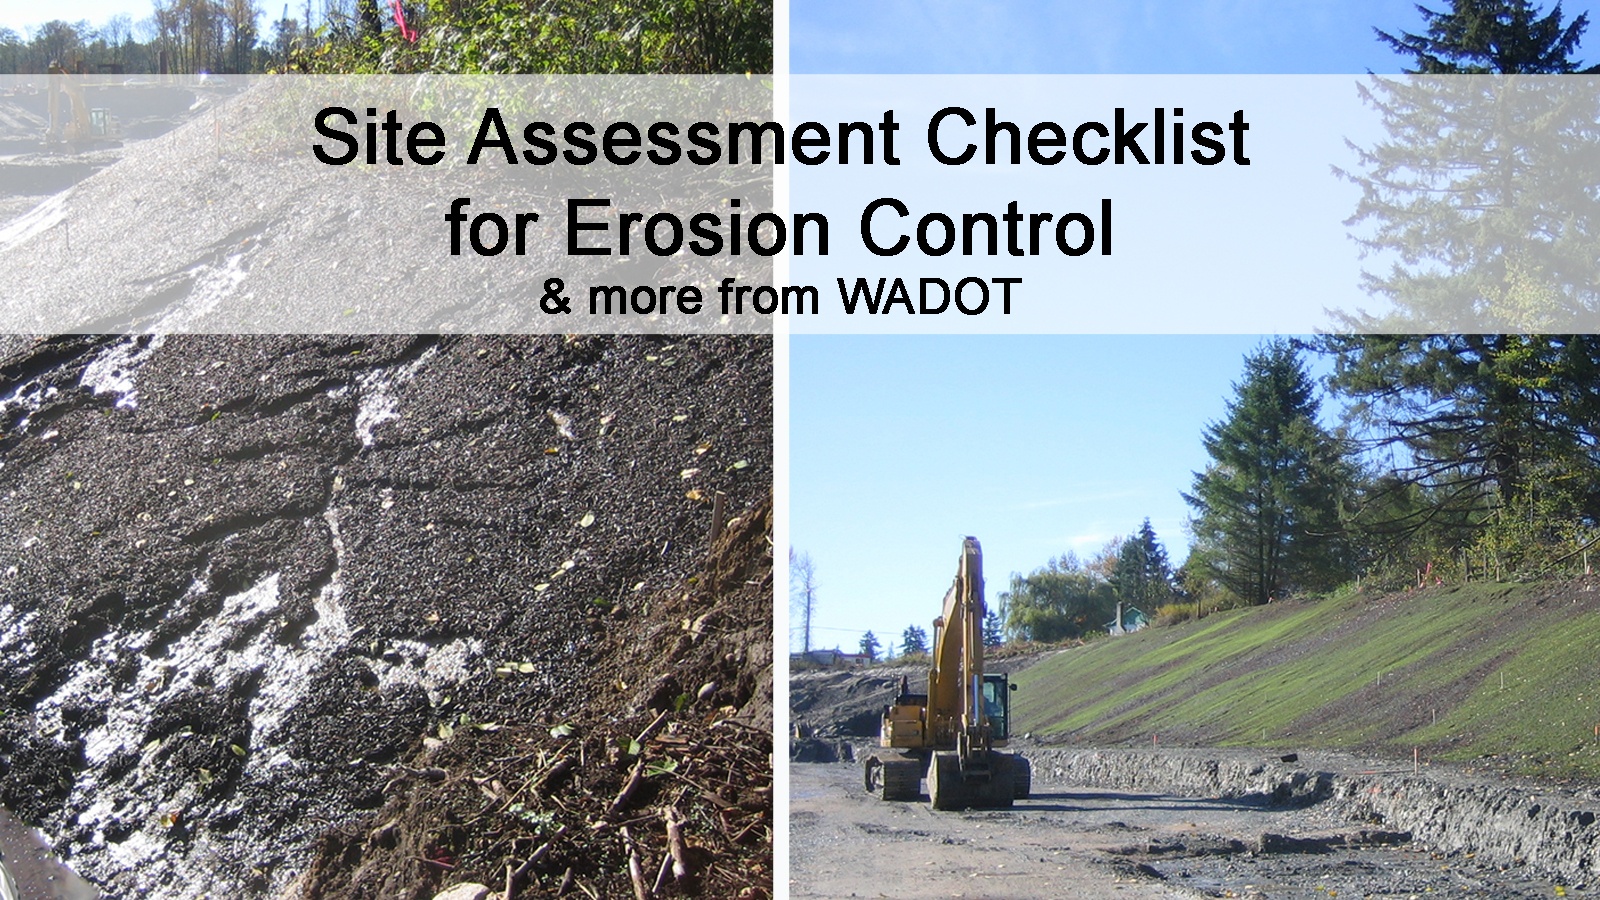 Site Assessment Checklist for Erosion Control... and more from WADOT